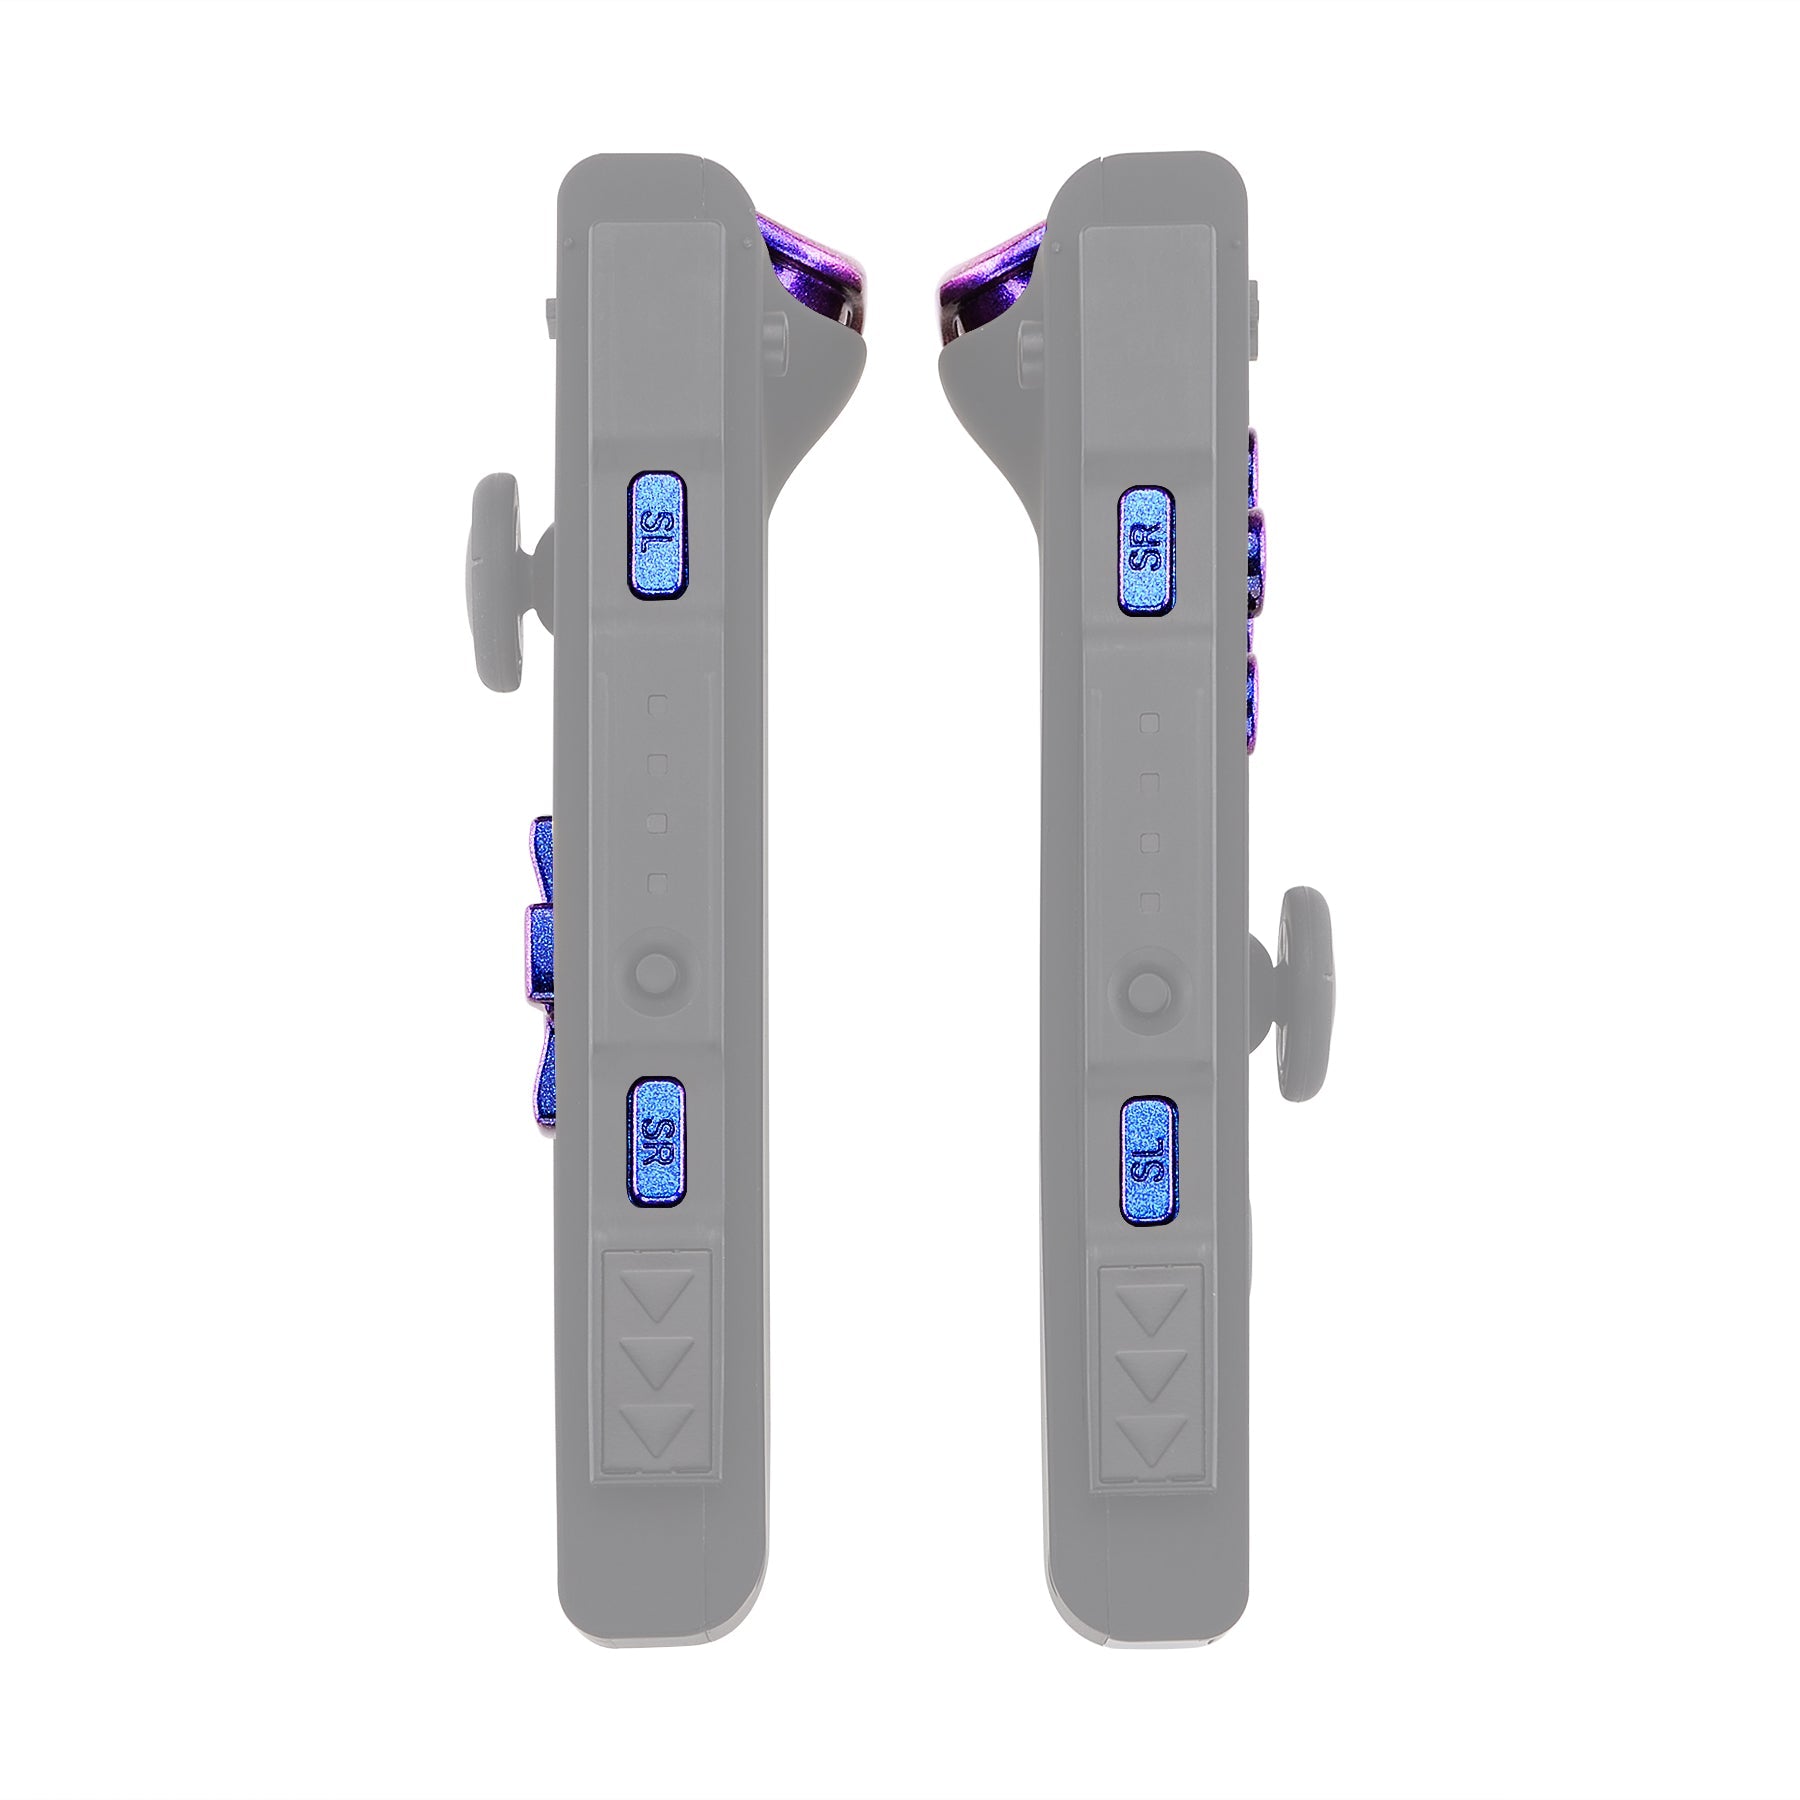 eXtremeRate Retail Chameleon Purple Blue D-pad ABXY Keys SR SL L R ZR ZL Trigger Buttons Springs, Replacement Full Set Buttons Fix Kits for NS Switch Joycon & OLED JoyCon (D-pad ONLY Fits for eXtremeRate Joycon D-pad Shell) - BZP301